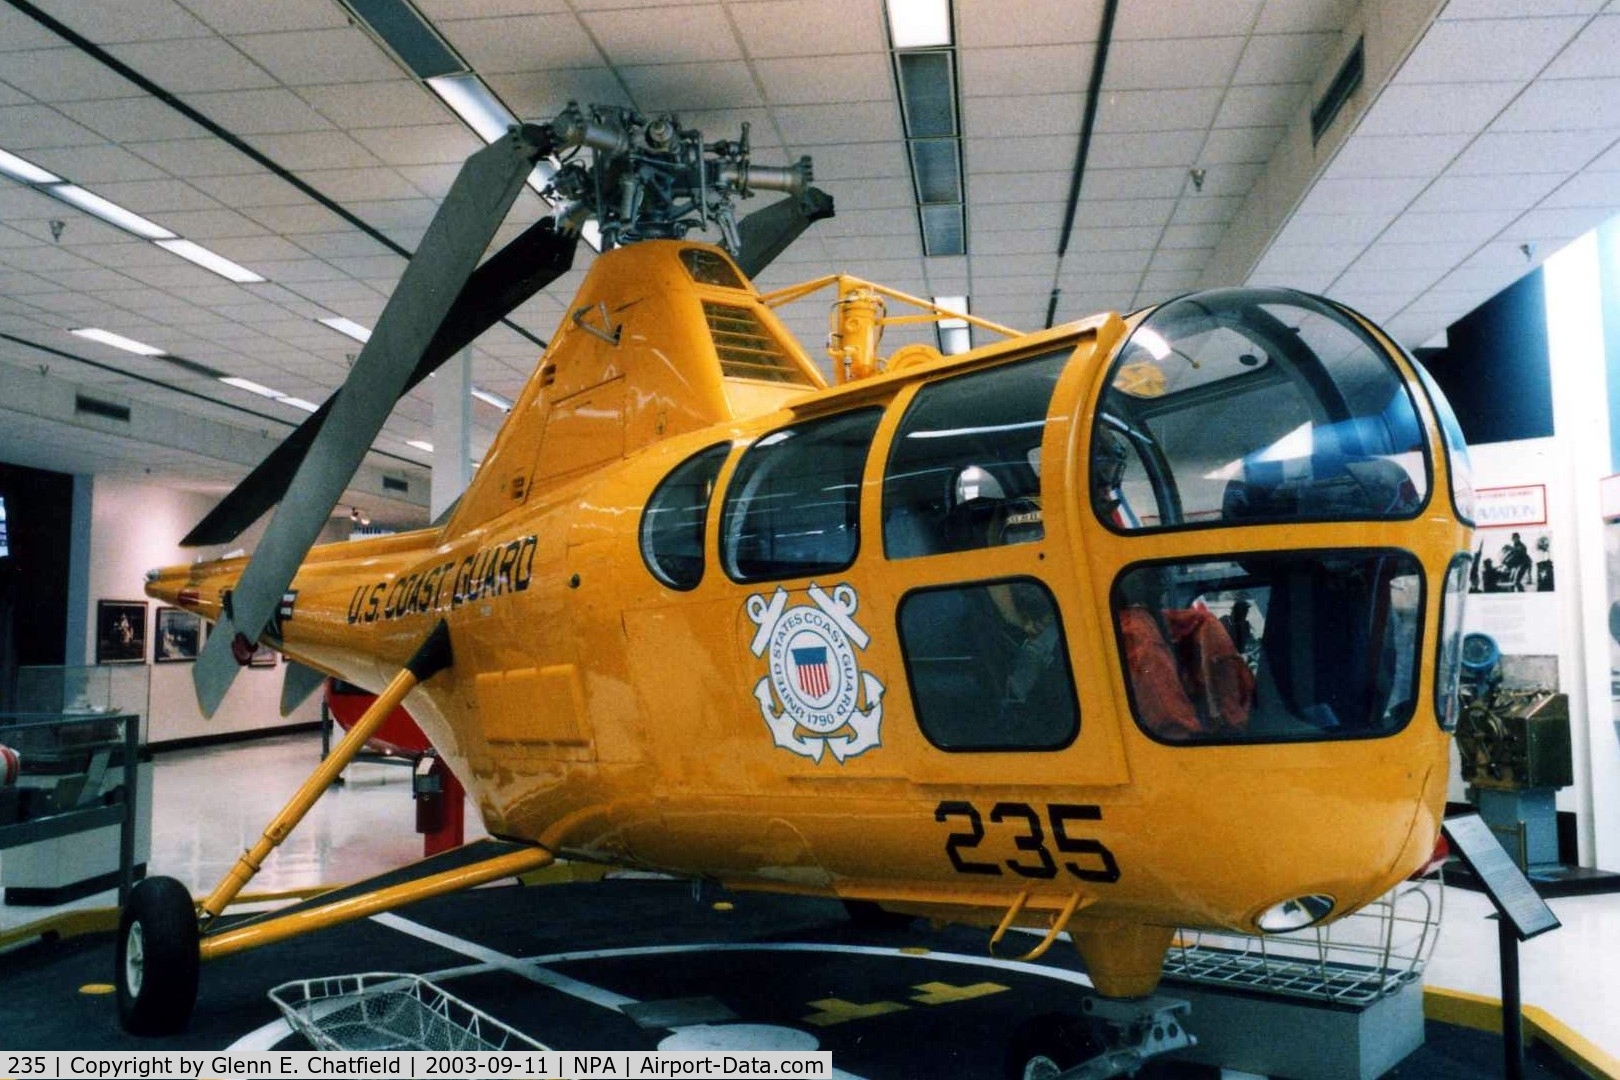 235, 1950 Sikorsky HO3S-1G C/N 51214, HO3S-1G at the National Museum of Naval Aviation